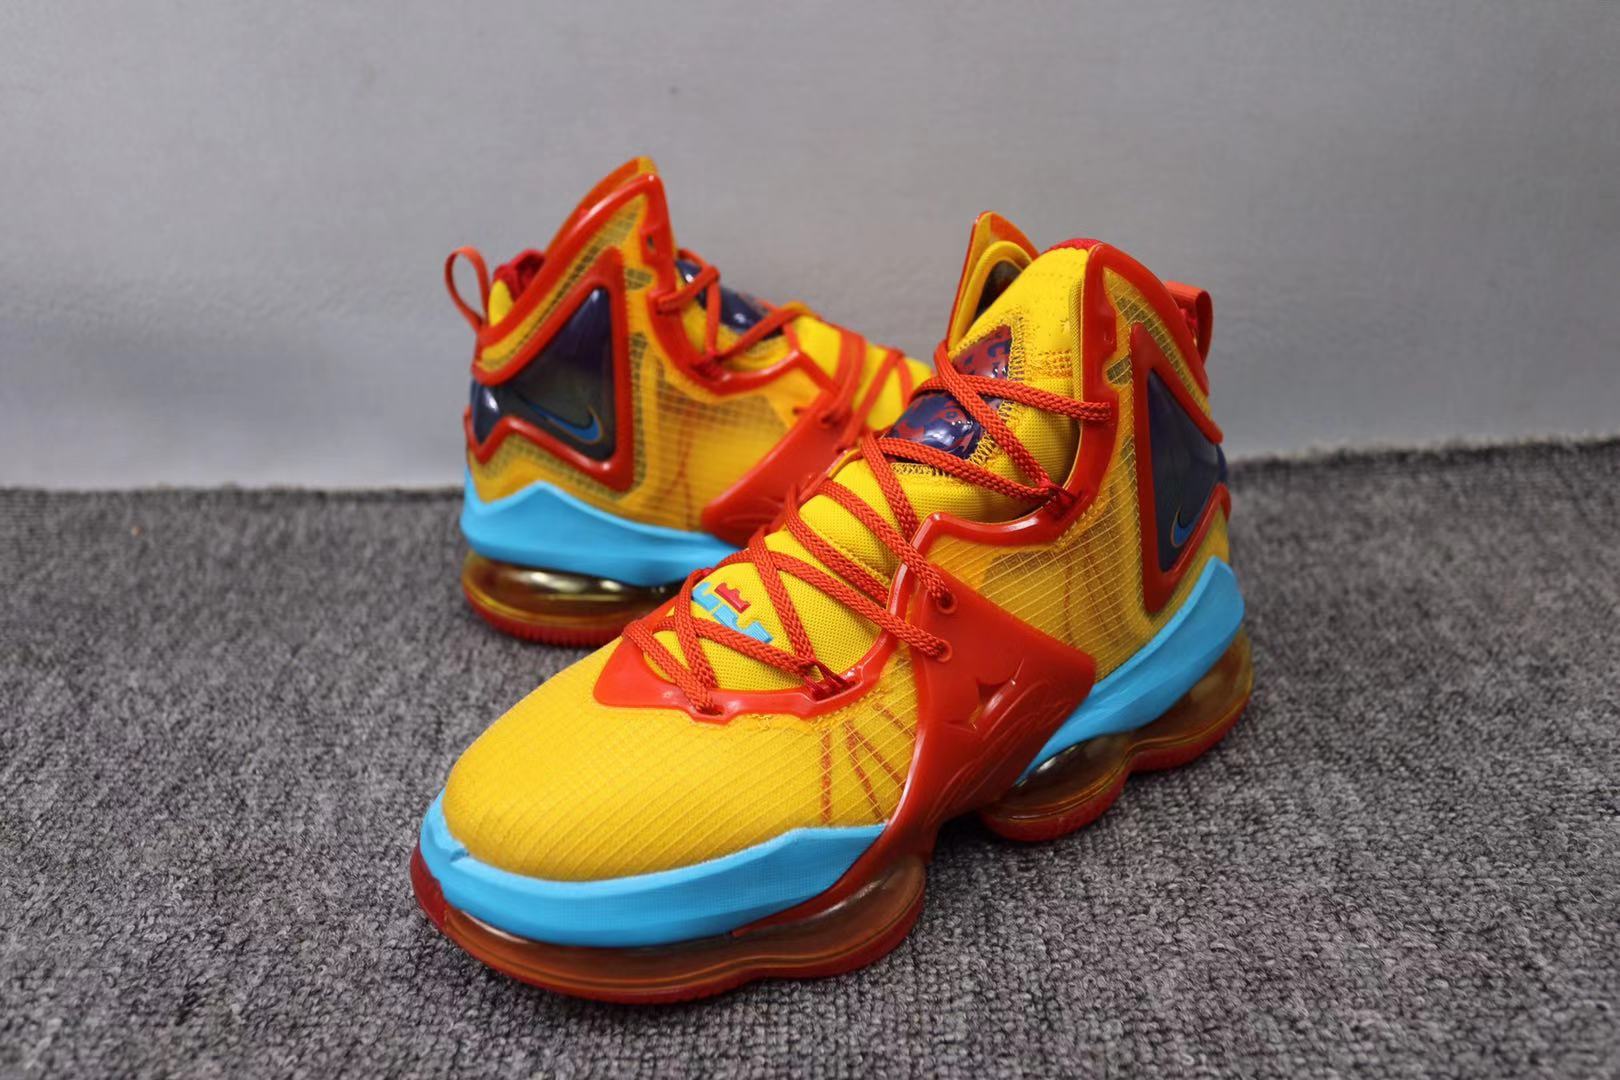 James sneakers 19th generation new red, yellow and blue men'